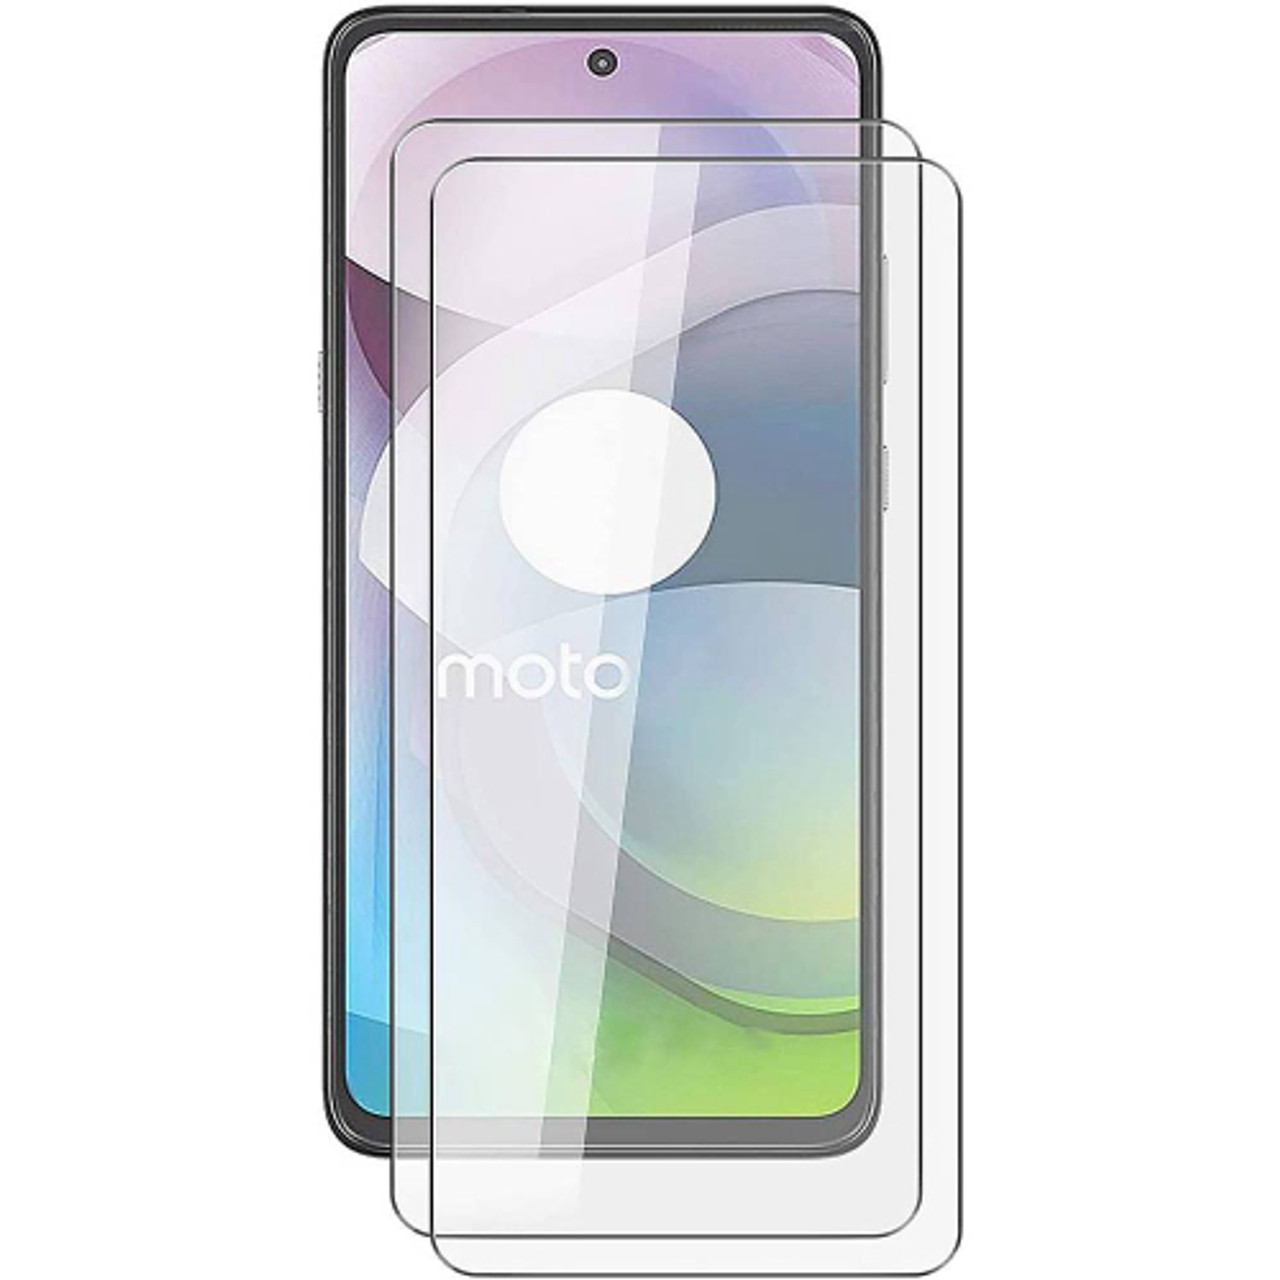 SaharaCase - Ultra Strong+ ZeroDamage HD Glass Screen Protector for Motorola One 5G Ace (2-Pack) - Clear